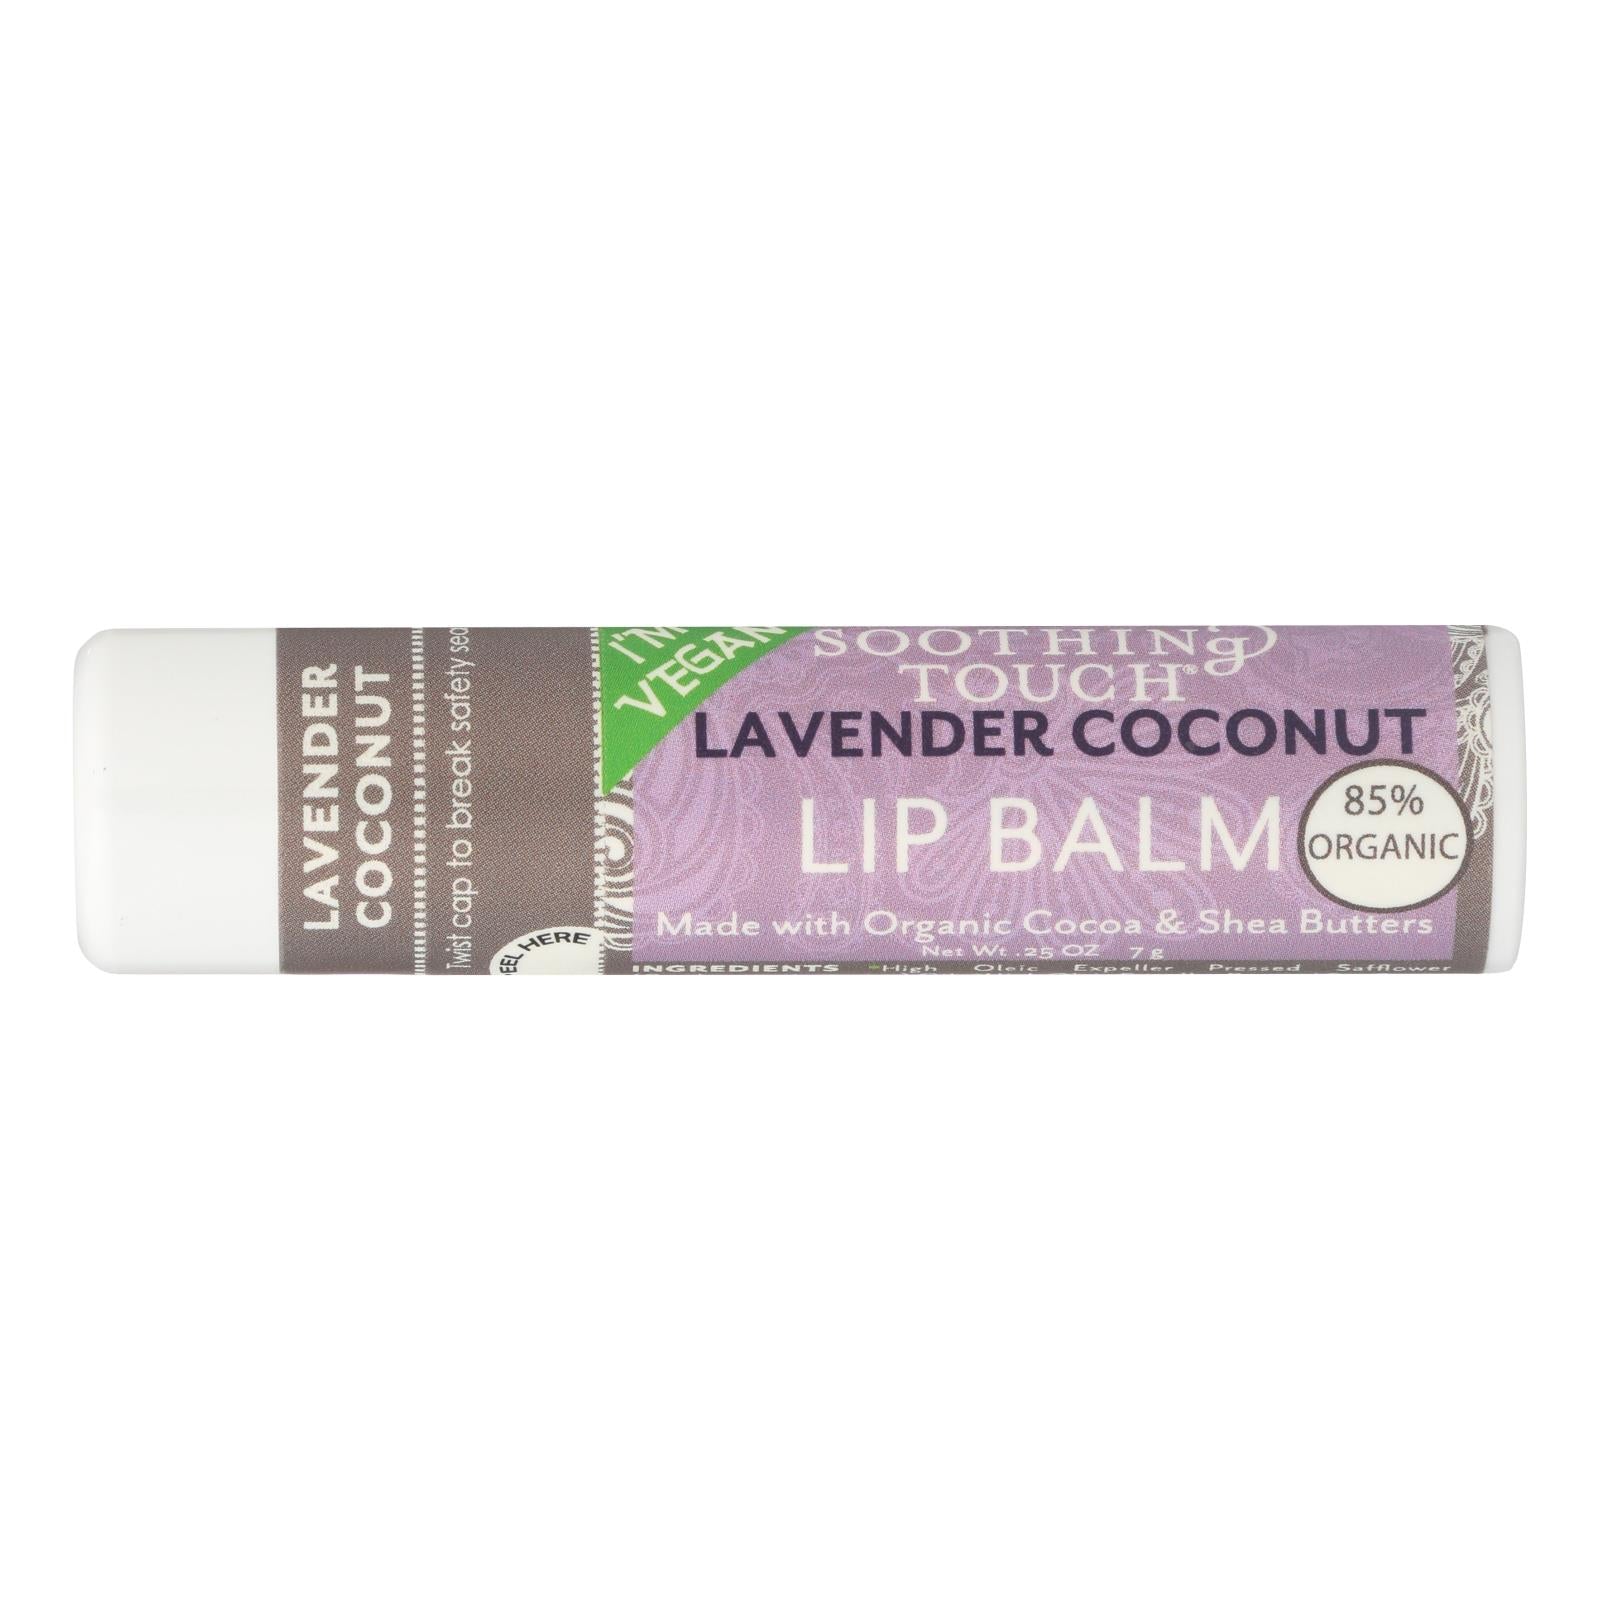 Soothing Touch Lavender Coconut Vegan Lip Balm  - Case Of 12 - .25 Oz